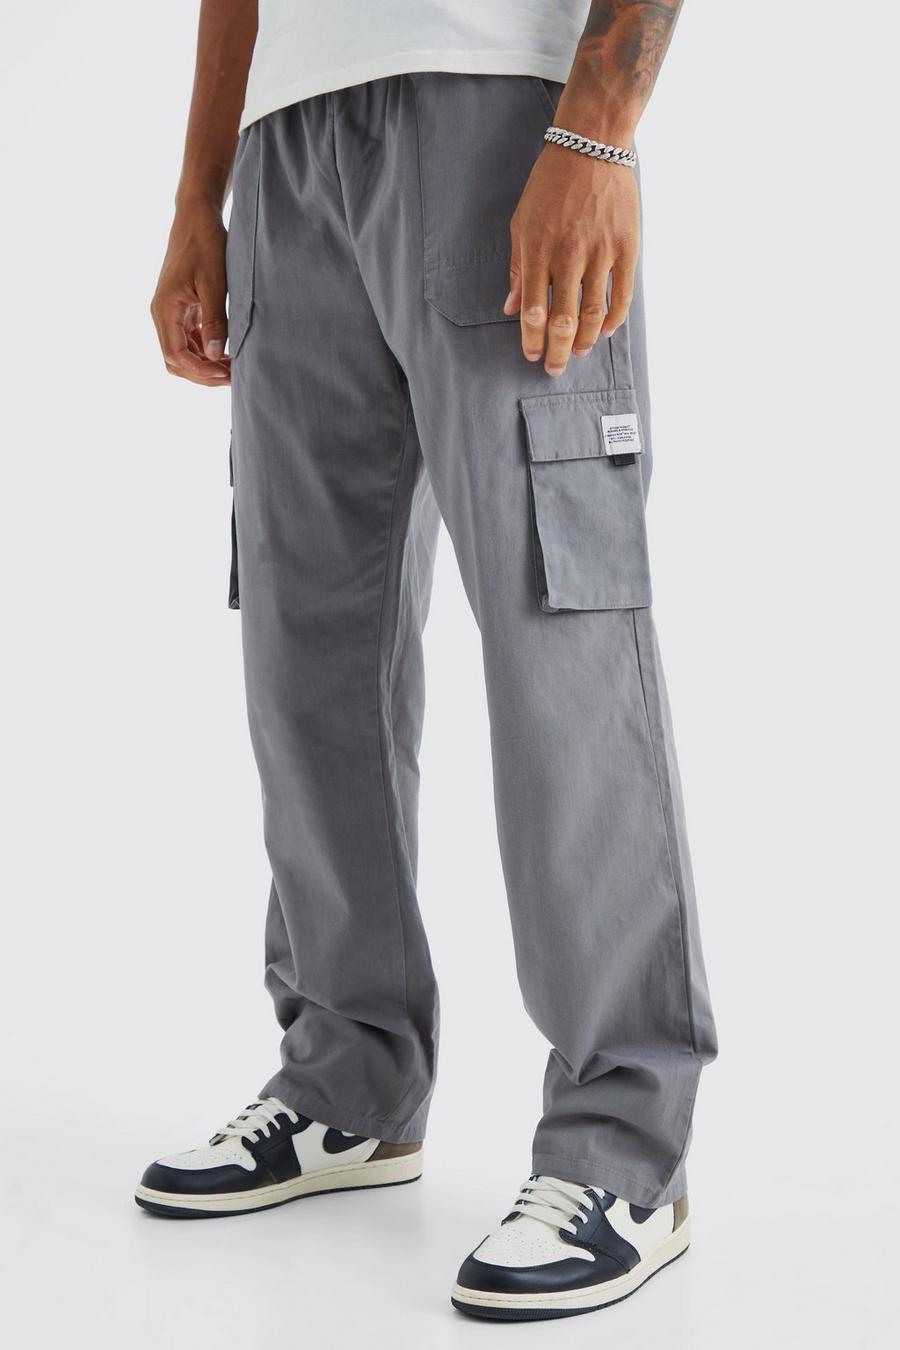 Slate Tall Elastic Waist Relaxed Fit Buckle Cargo Sweatpant